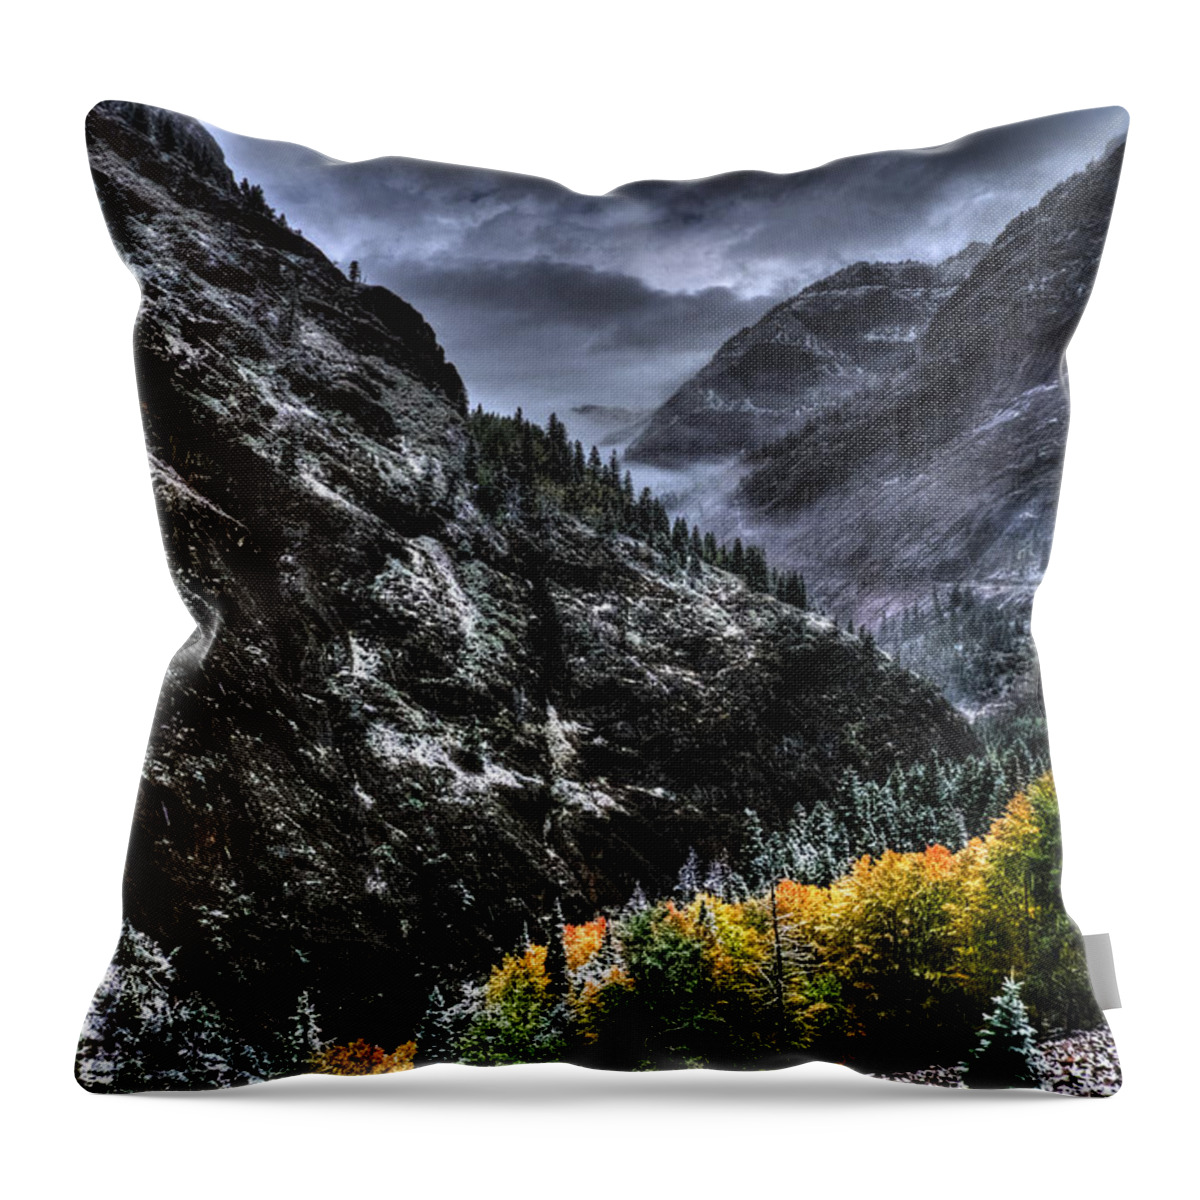 The Stormy Road To Ouray Throw Pillow featuring the digital art The Stormy Road to Ouray by William Fields